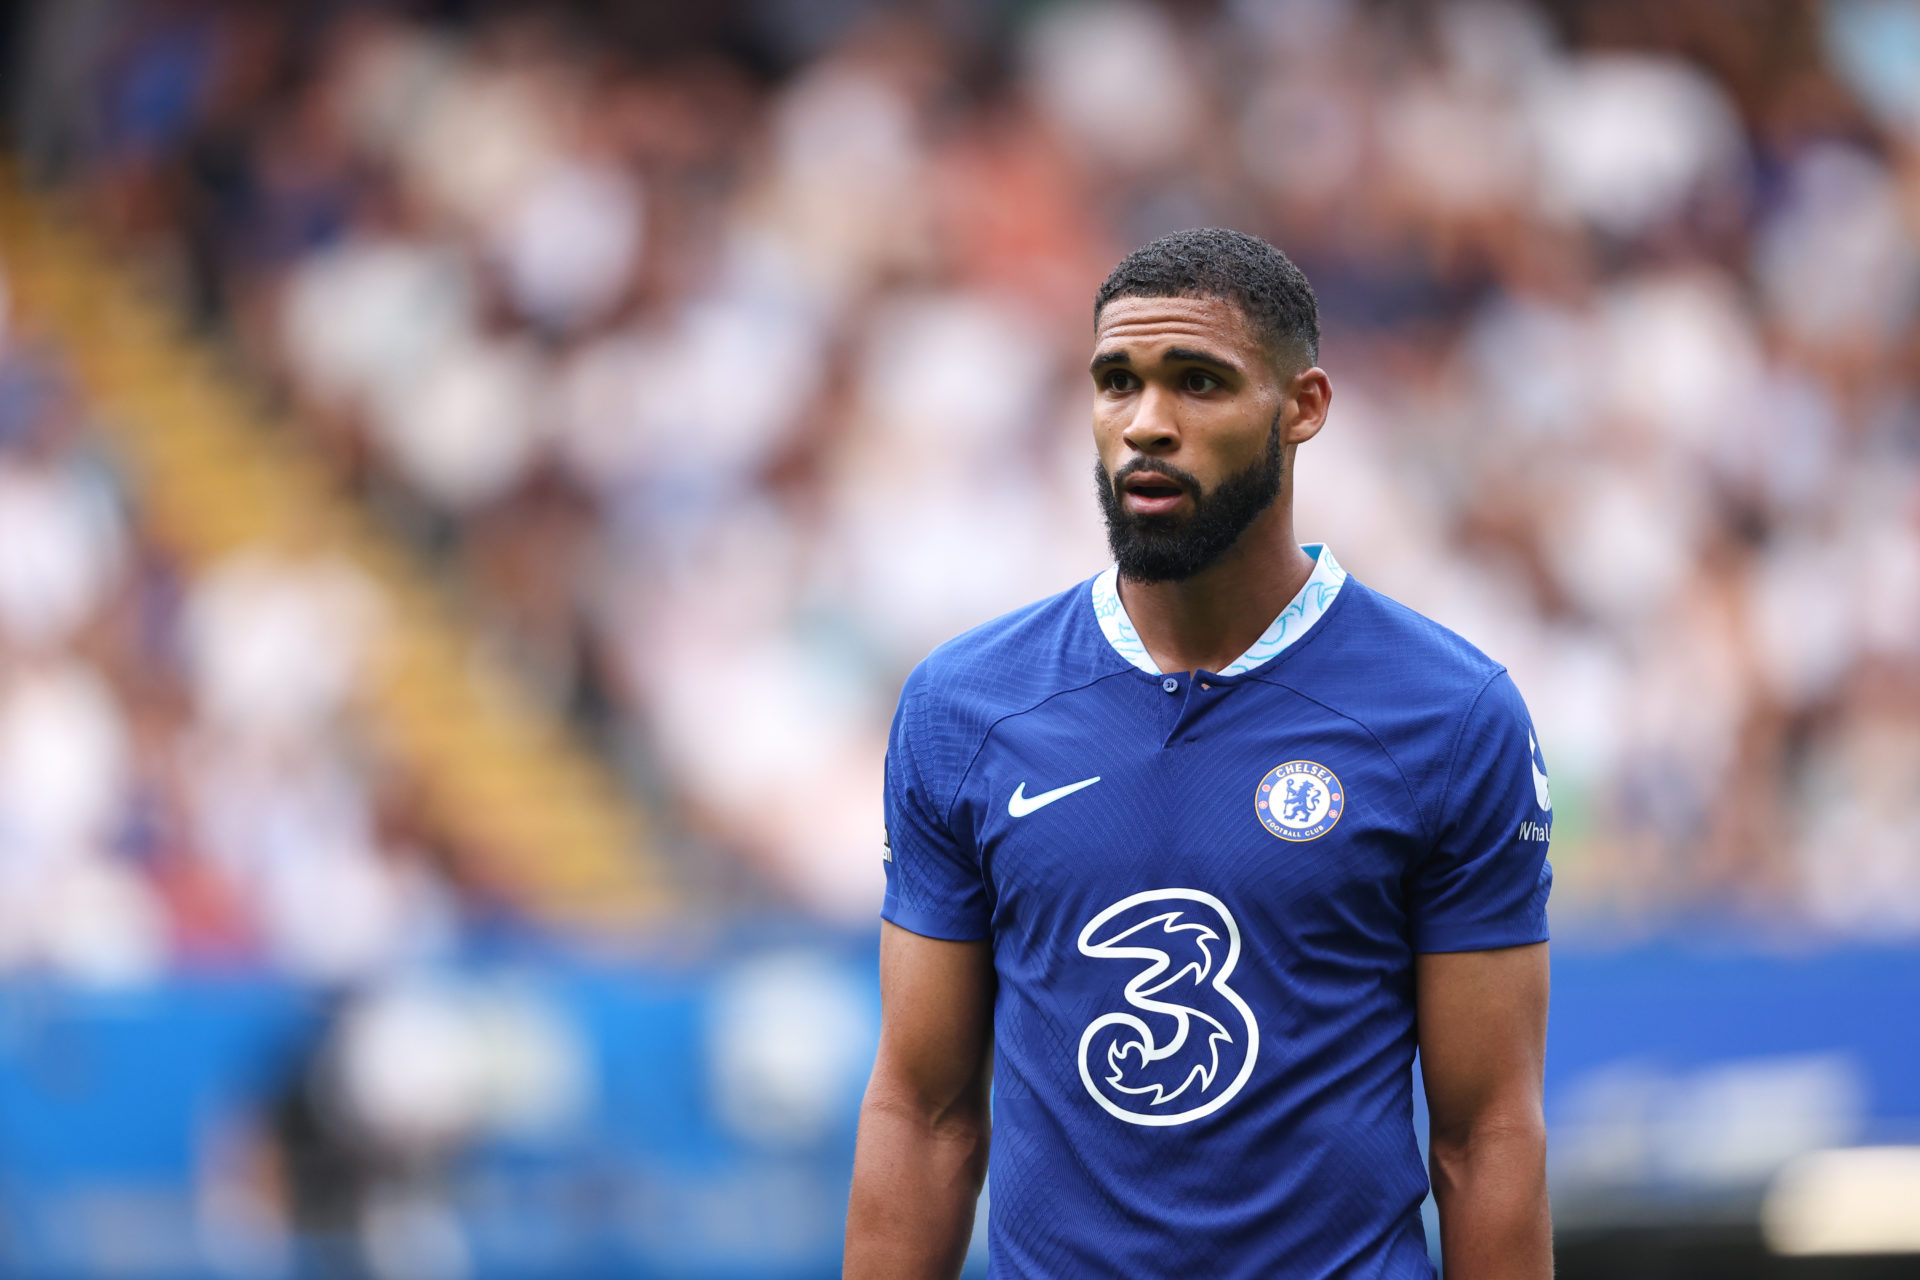 Milan announced the arrival of Marco Sportiello Wednesday and will onboard two more players soon, Ruben Loftus-Cheek and Luka Romero.